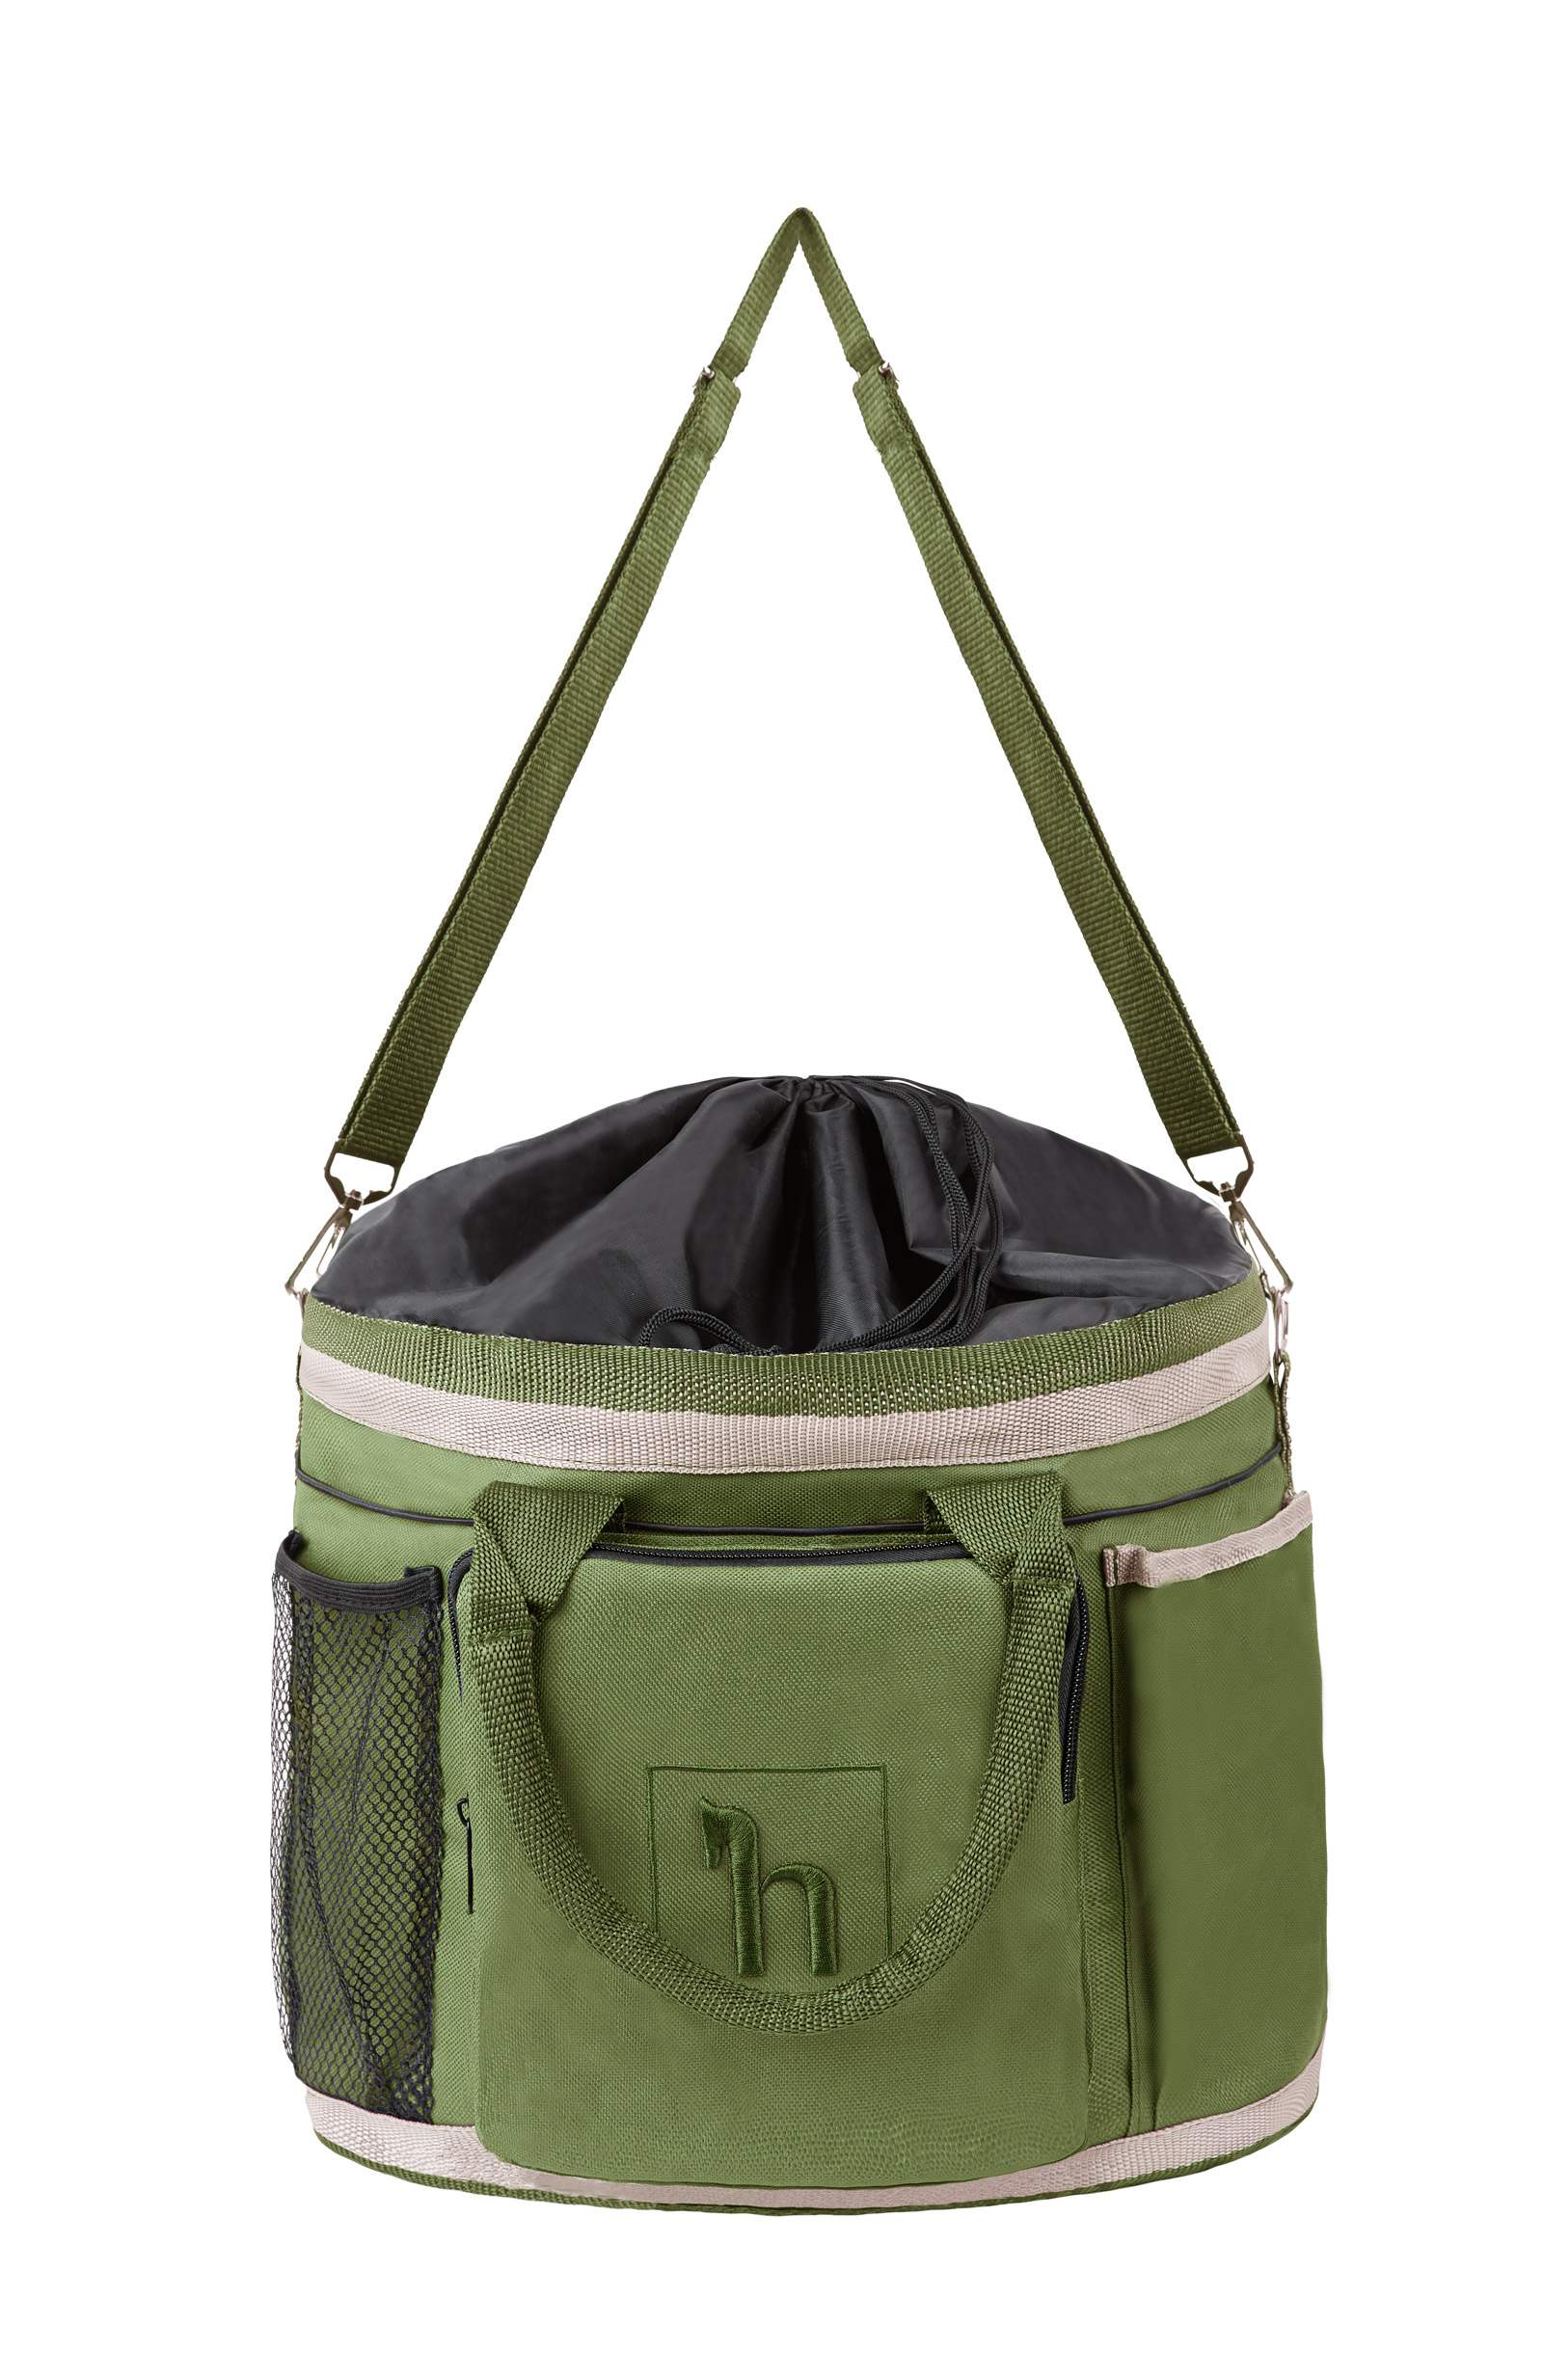 BUSSE stable bag RIO - DocHorse